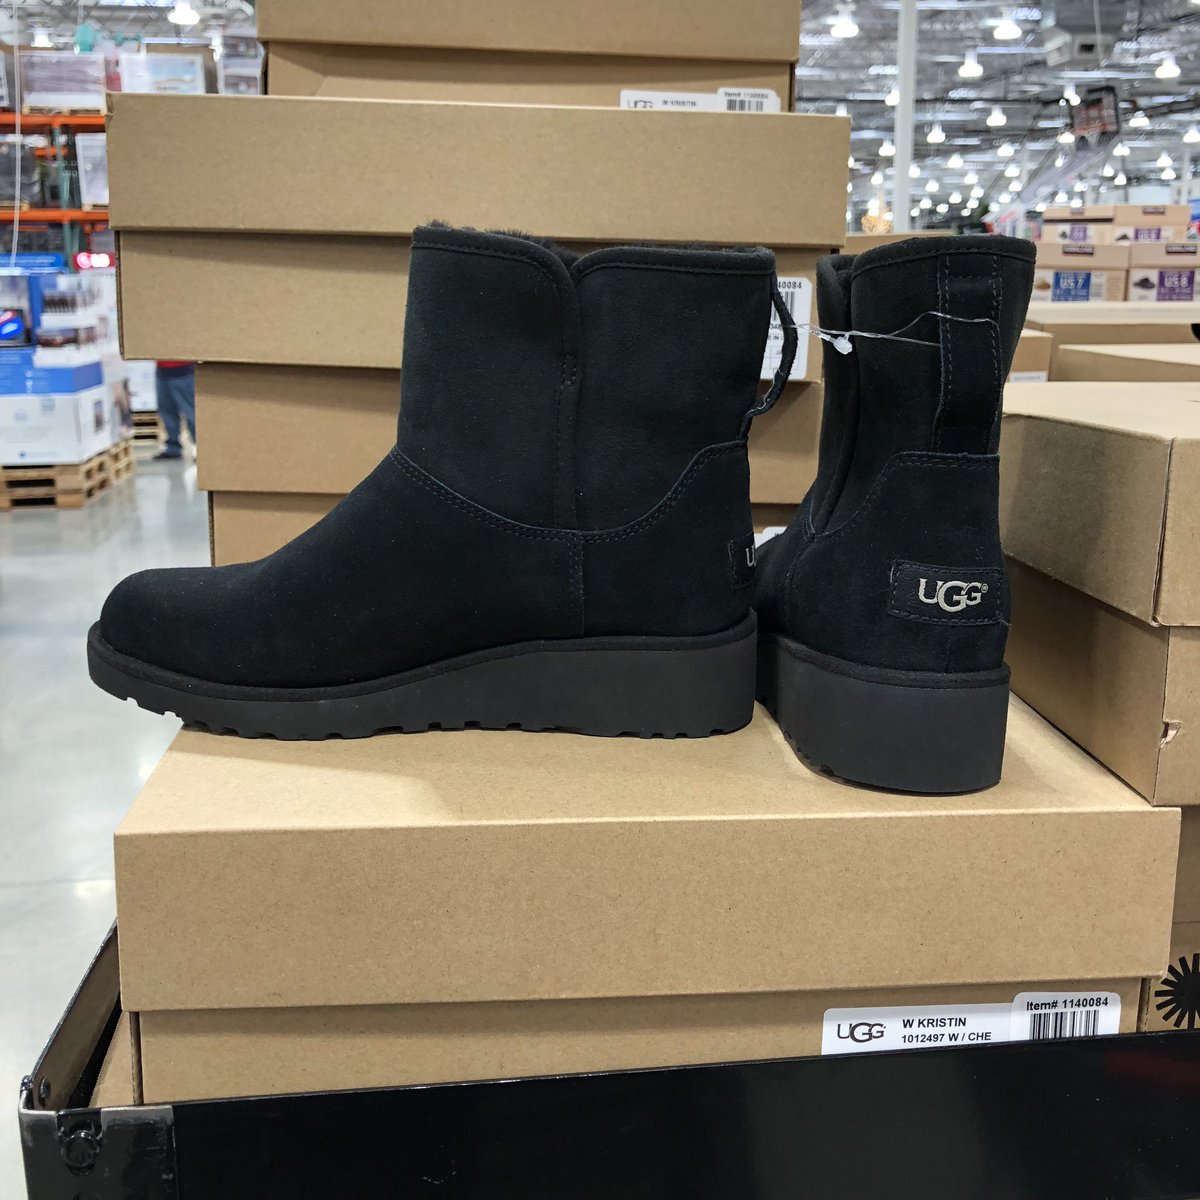 UGG Women's Kristin Boot spotted at the 